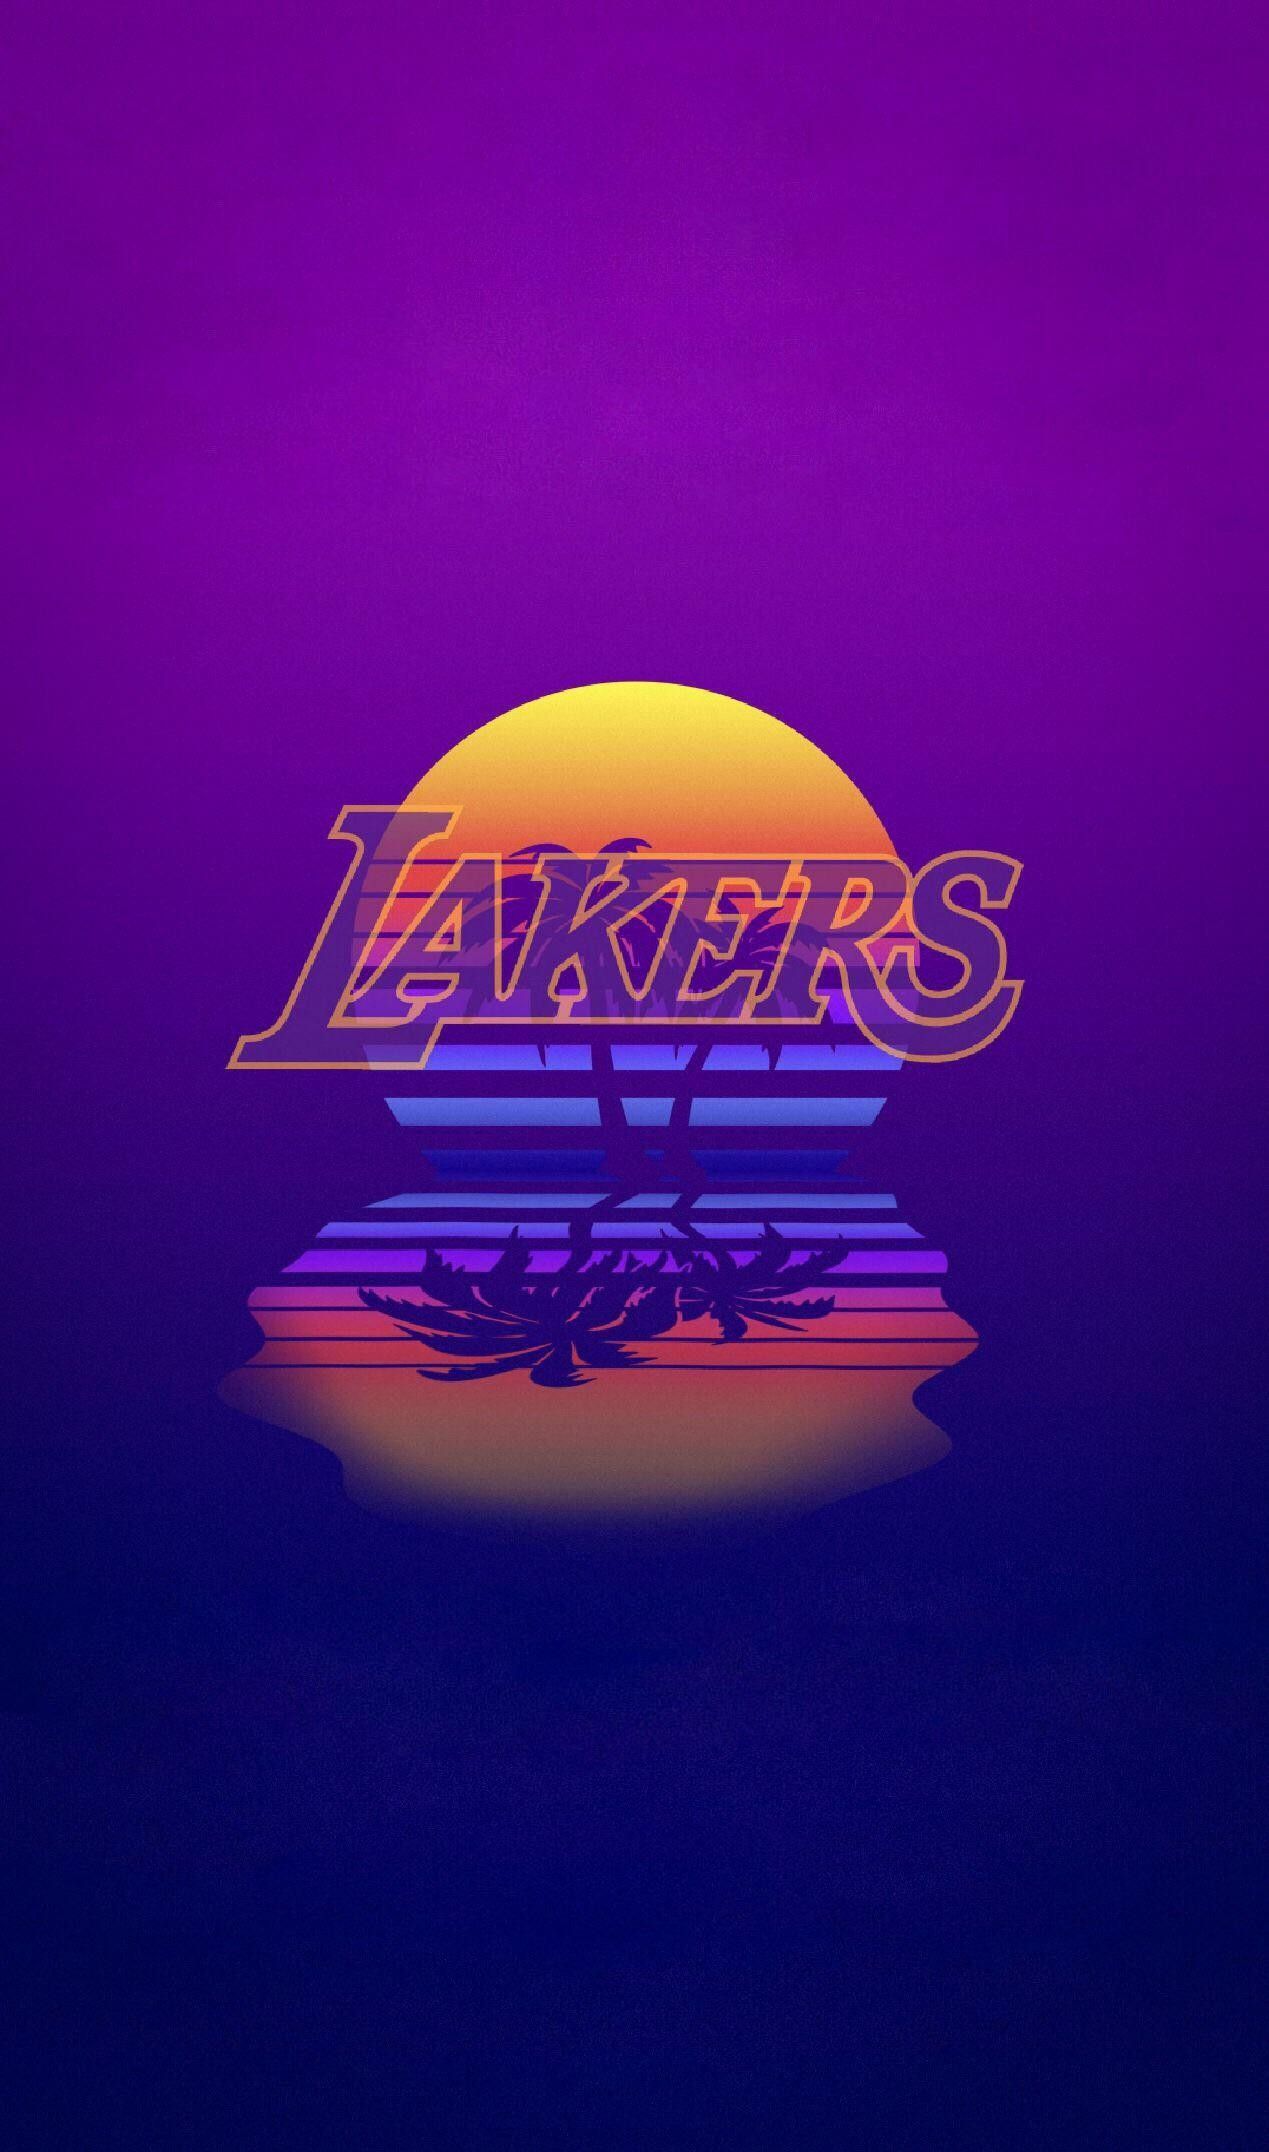 Lakers wallpaper for mobiles and desktops - Los Angeles Lakers